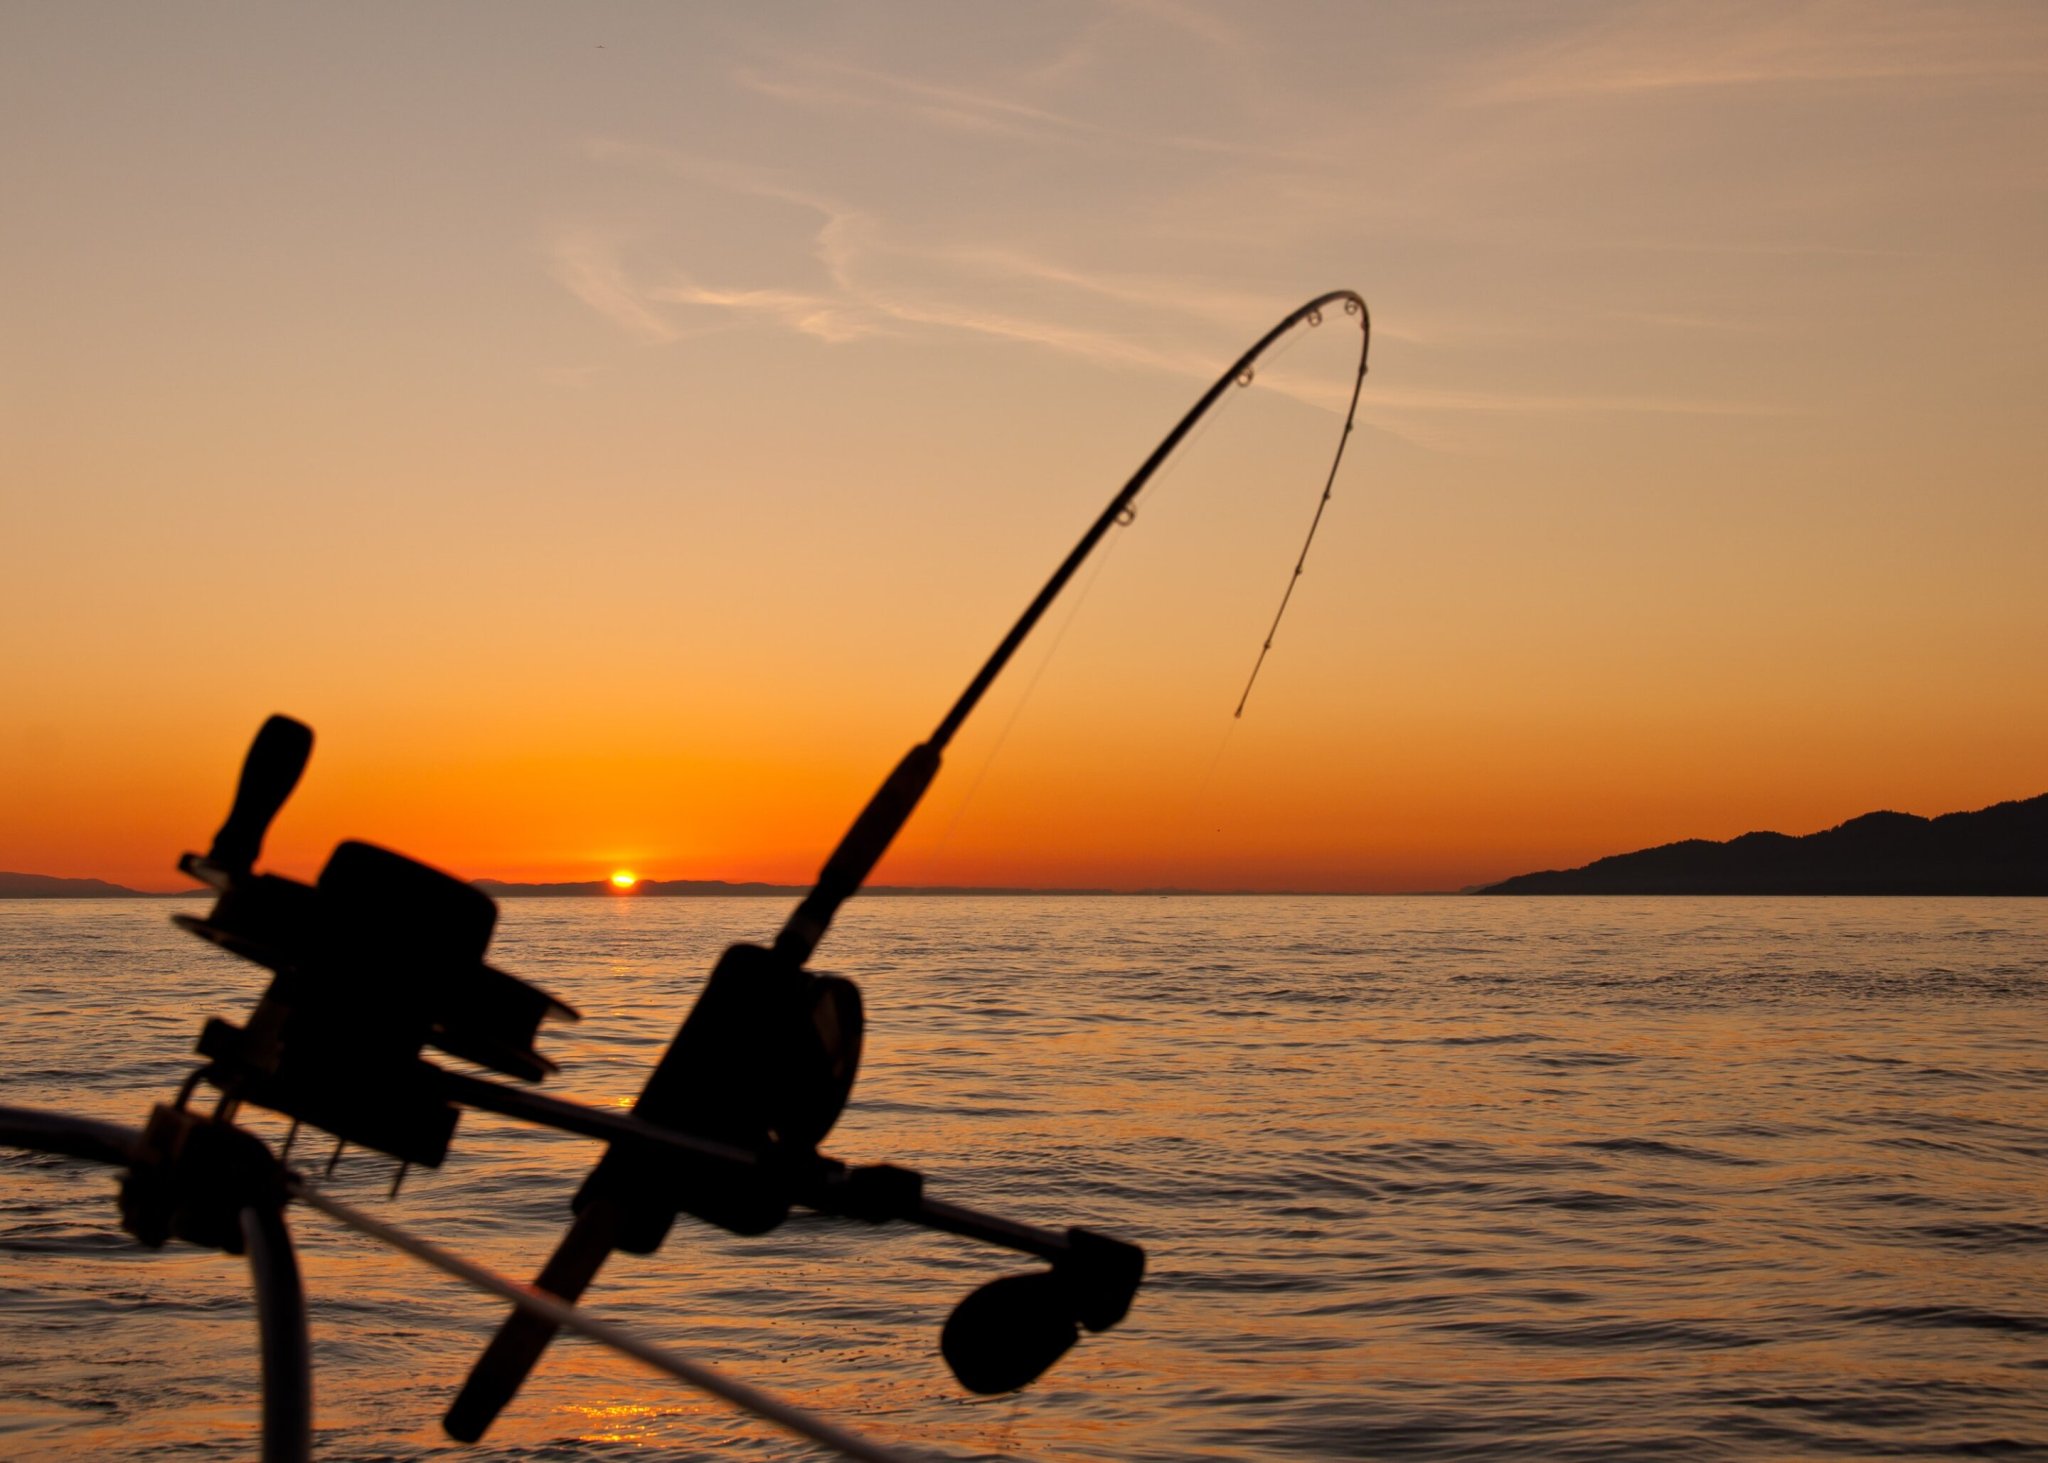 Fishing could ease severe mental health issues, survey finds